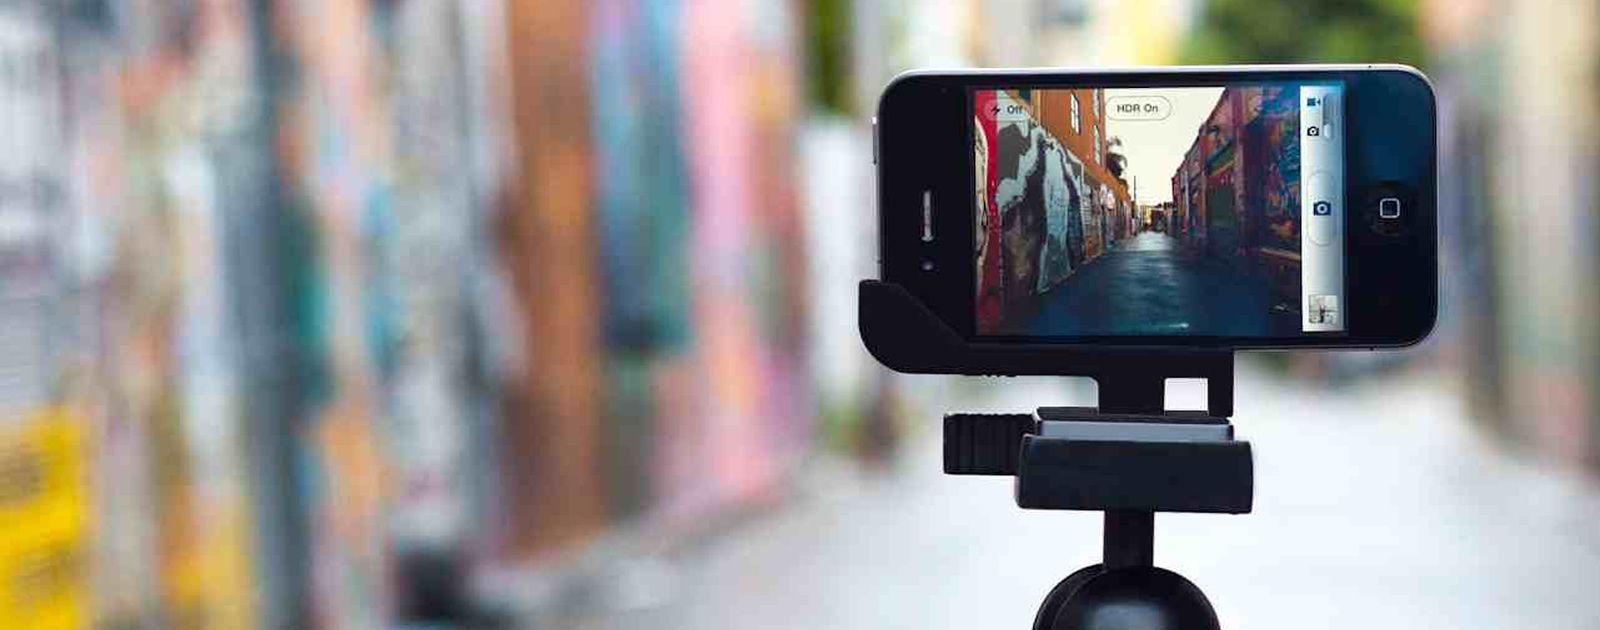 25 Really Actionable Tips For Better Facebook Video Marketing